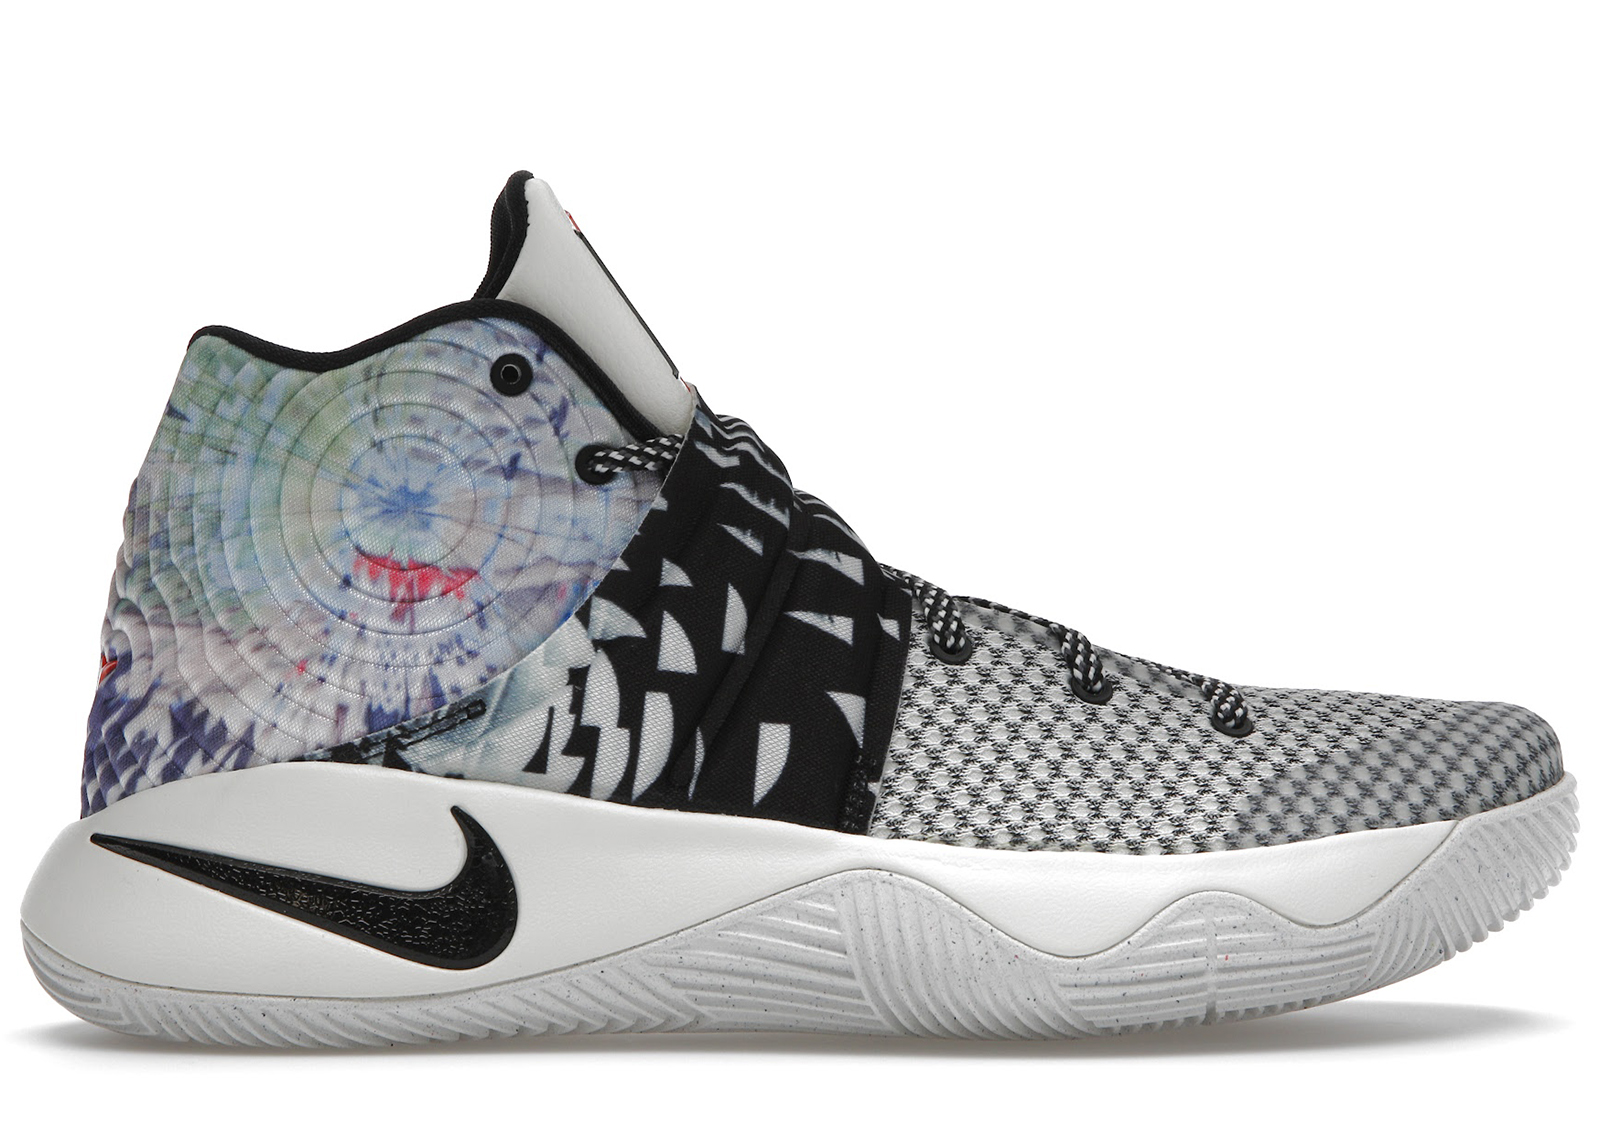 Nike Kyrie 2 The Effect Men's - 819583-901/820537-901 - US